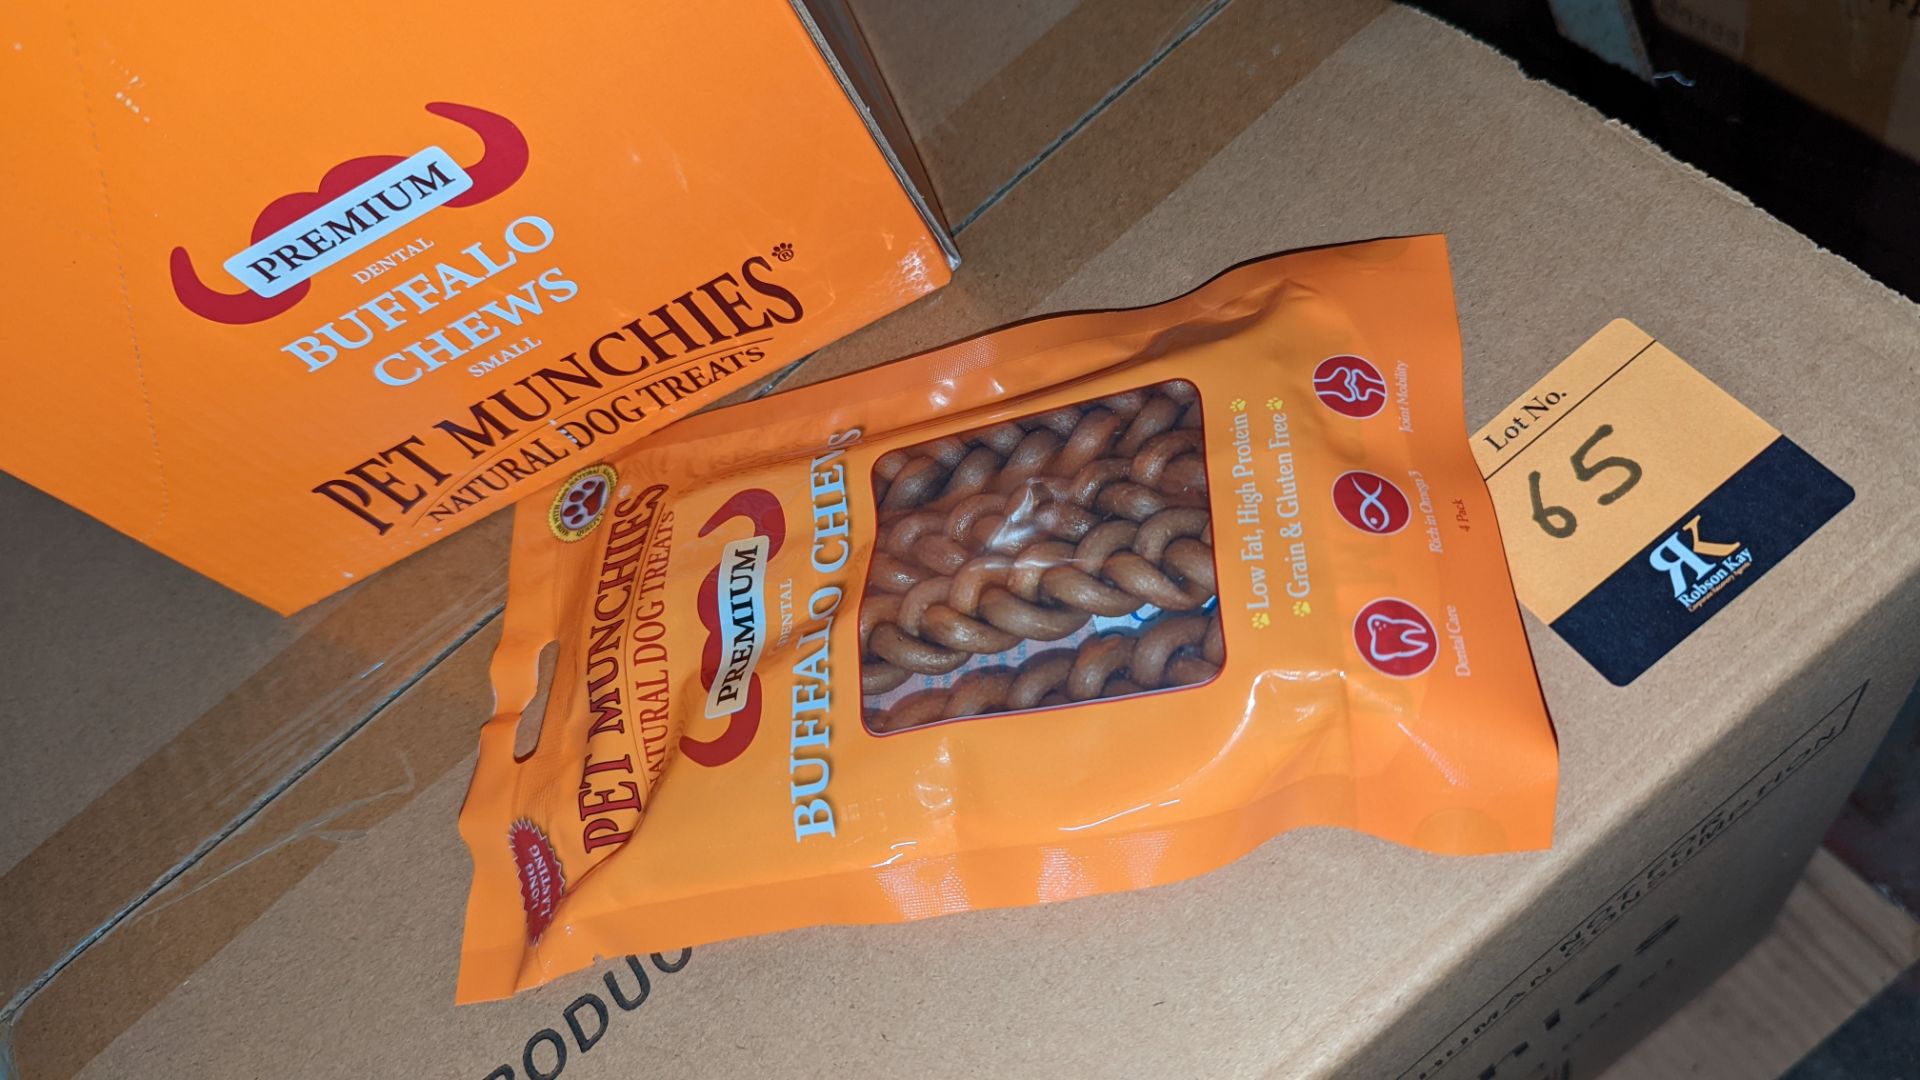 Pet Munchies dried pet chews for dogs. This lot consists of a total of 24 orange retail display box - Image 3 of 4